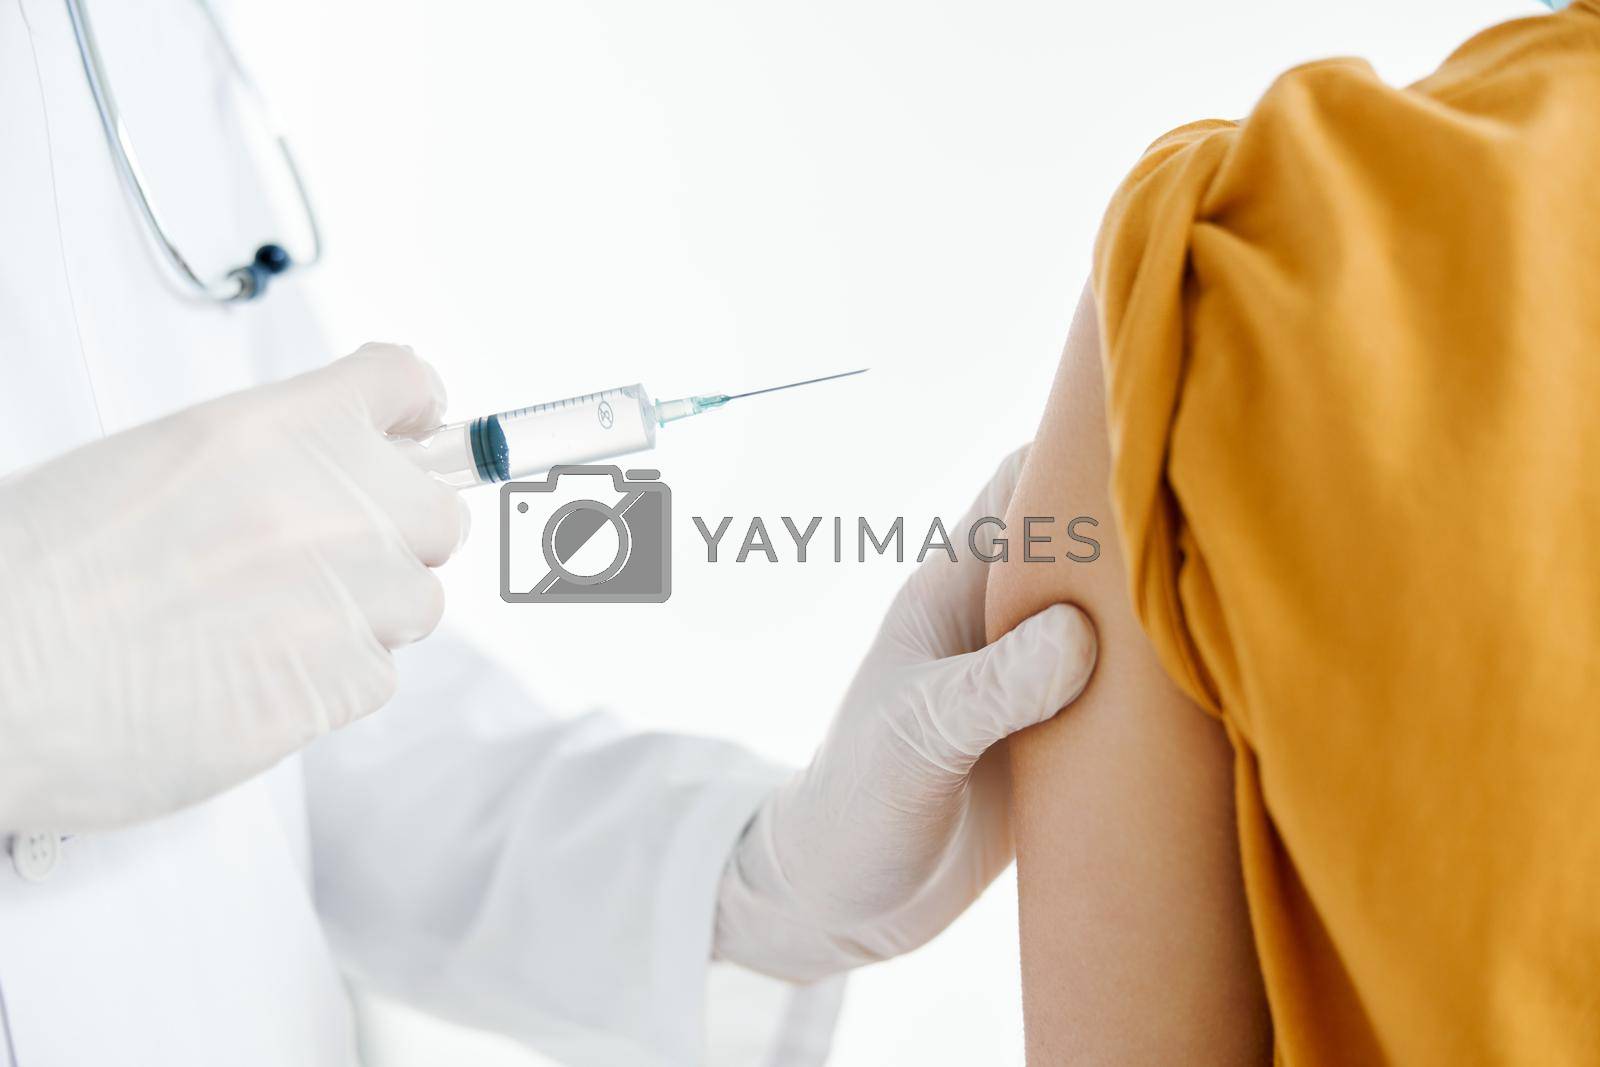 Royalty free image of doctor giving injection to patient's shoulder close-up cropped view syringe epidemic covid by SHOTPRIME